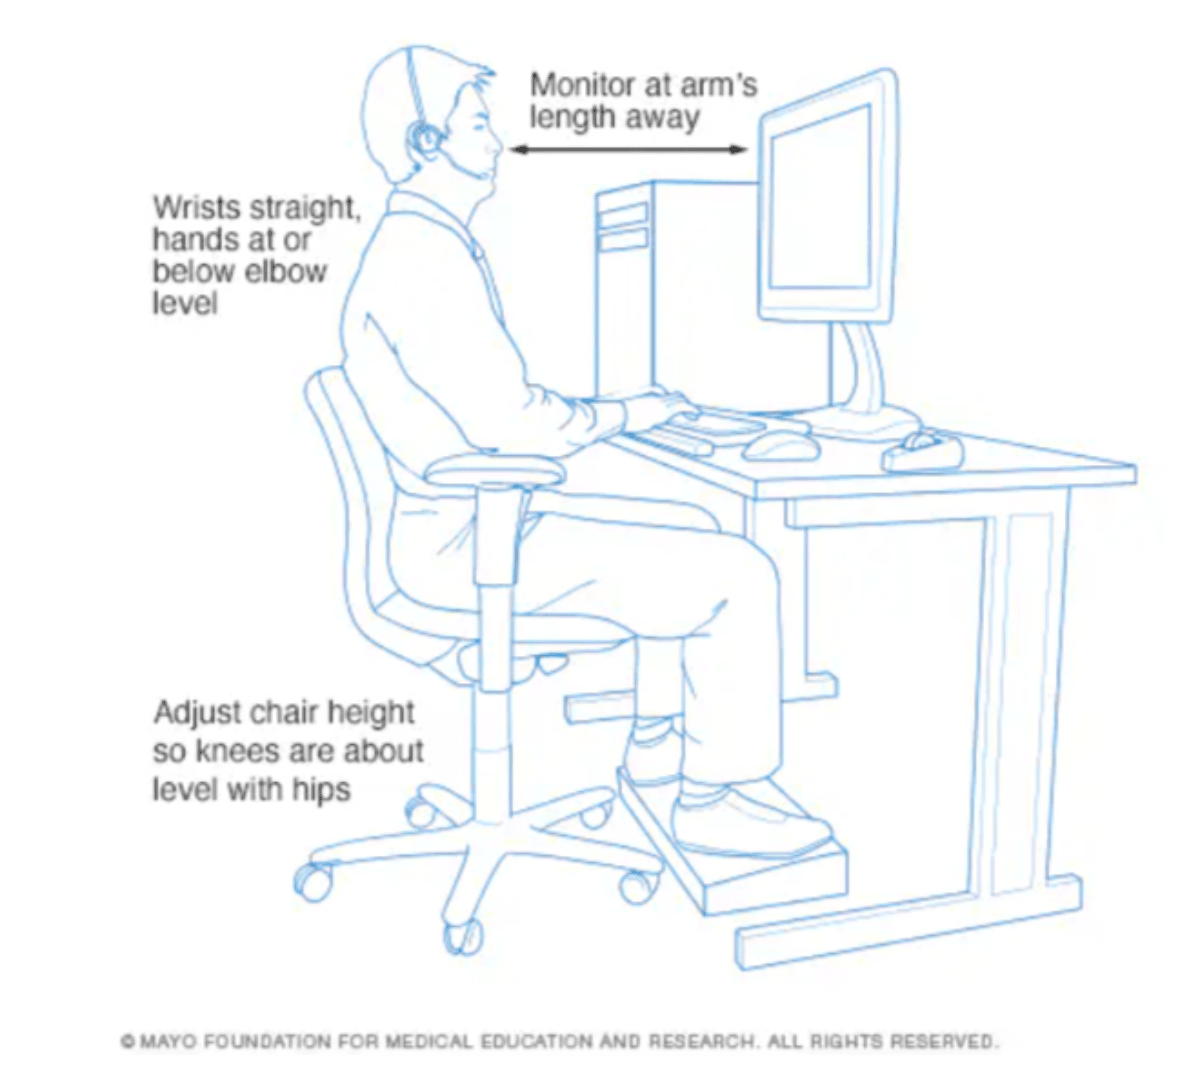 In this illustration from the Mayo Clinic, we see a man sitting in a rolling chair in front of a desk and computer monitor. At the top of the illustration, it shows how his monitor is an arm’s length away. On the left, we see a note showing how his wrists are straight, hands at or below elbow level. At the bottom, there’s a note indicating that the chair height should be adjusted so knees are about level with the hips.